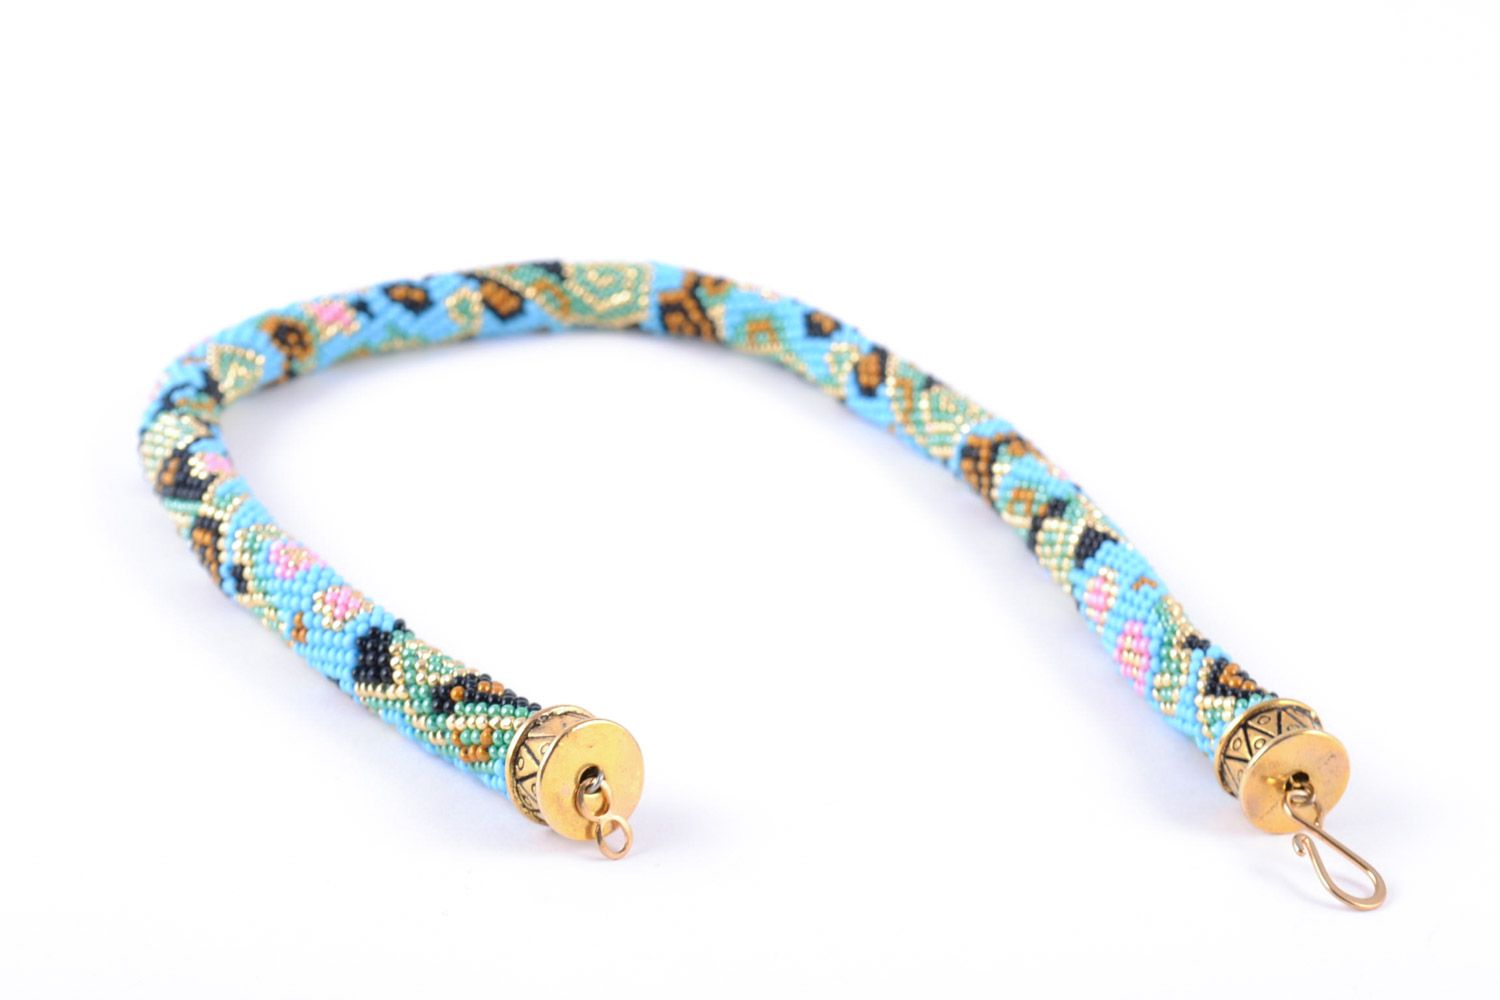 Handmade Czech bead cord necklace of turquoise color with unusual patterns photo 5